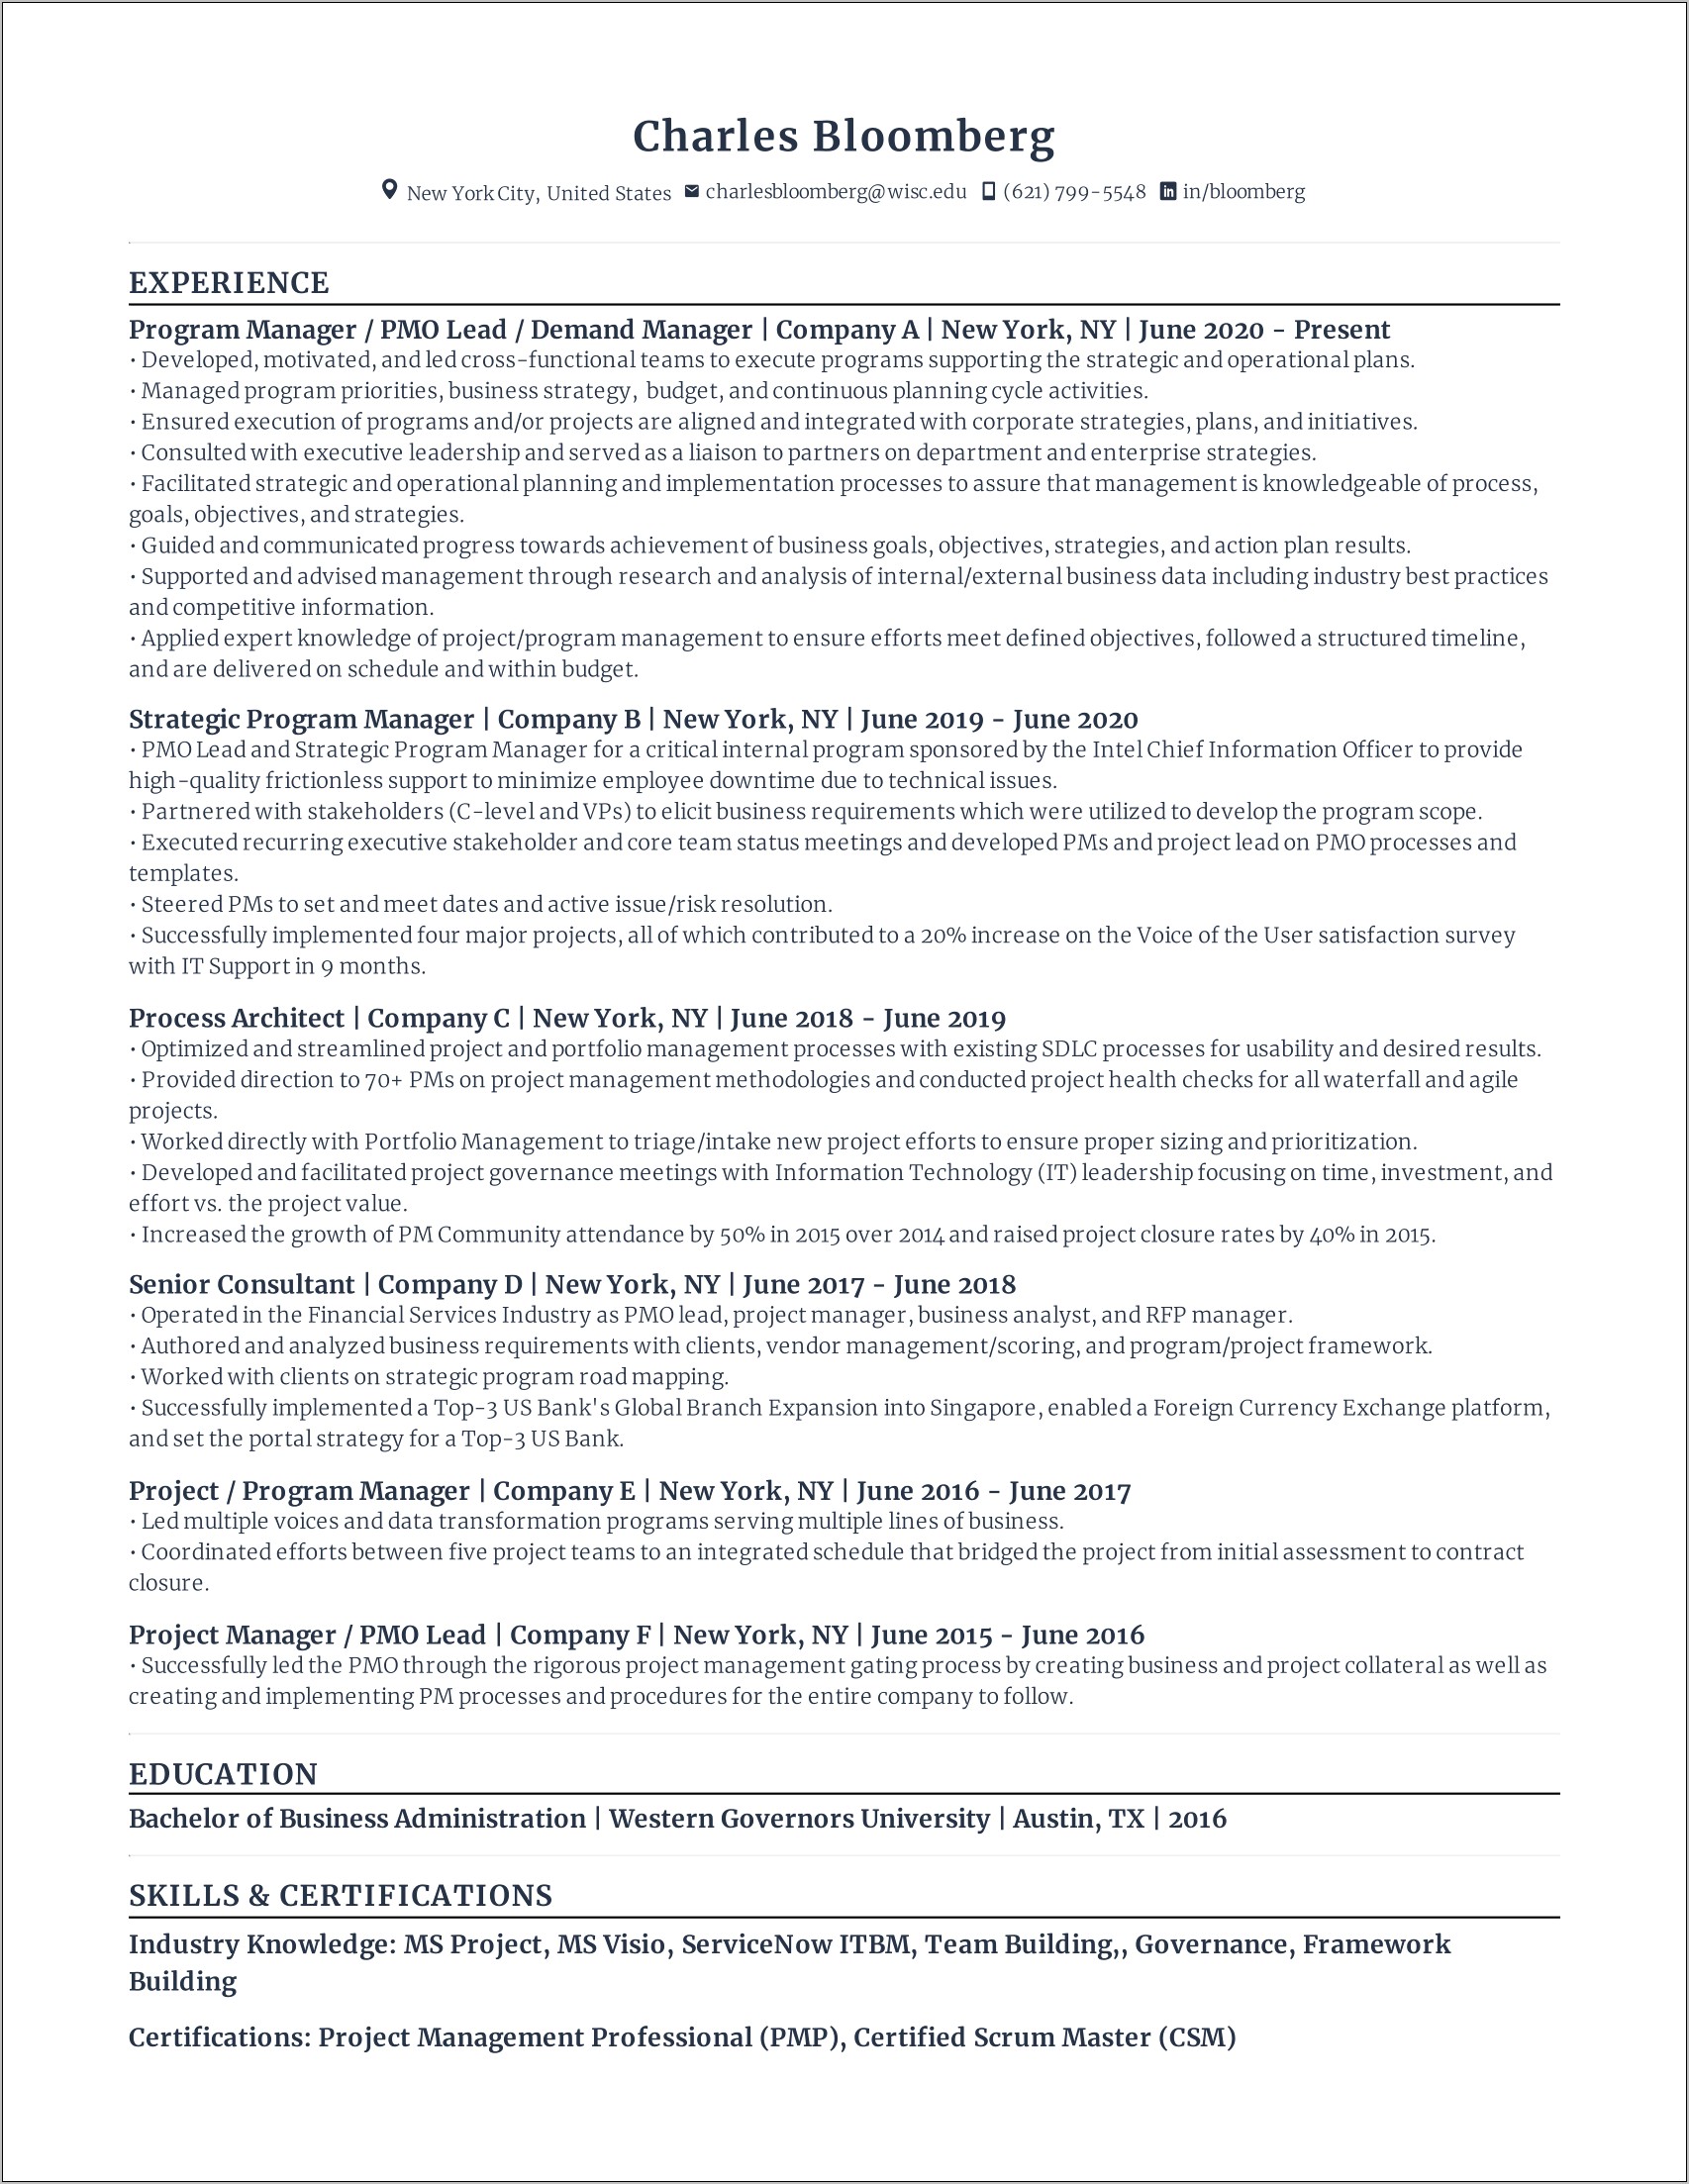 Resume If You Haven't Worked Before